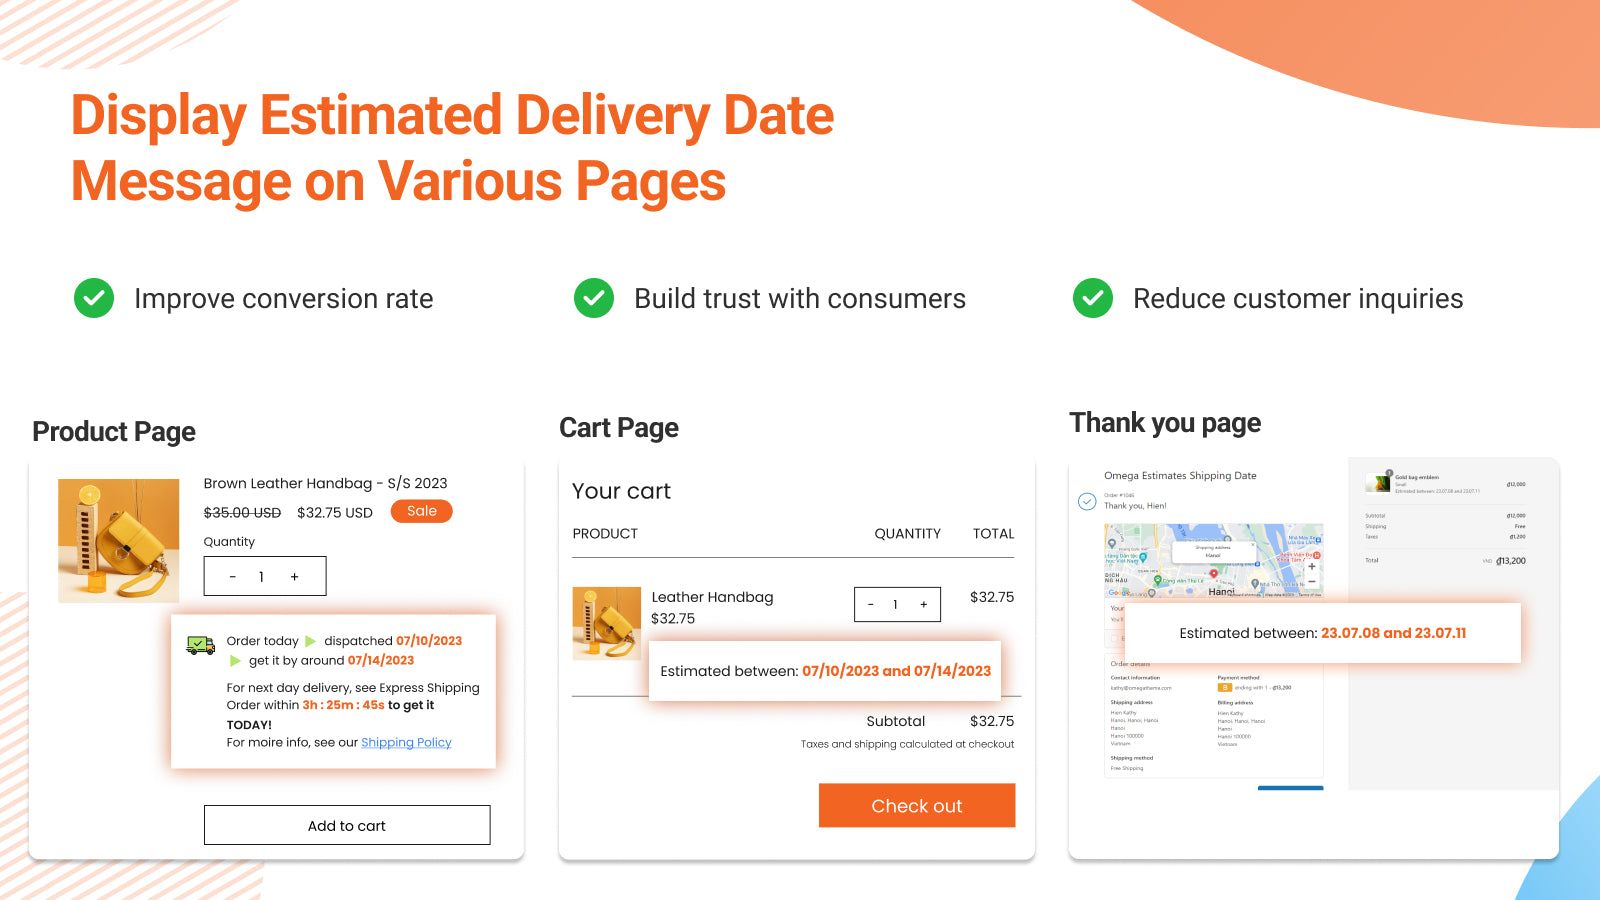 Display Estimated Delivery Date Message on Various Pages